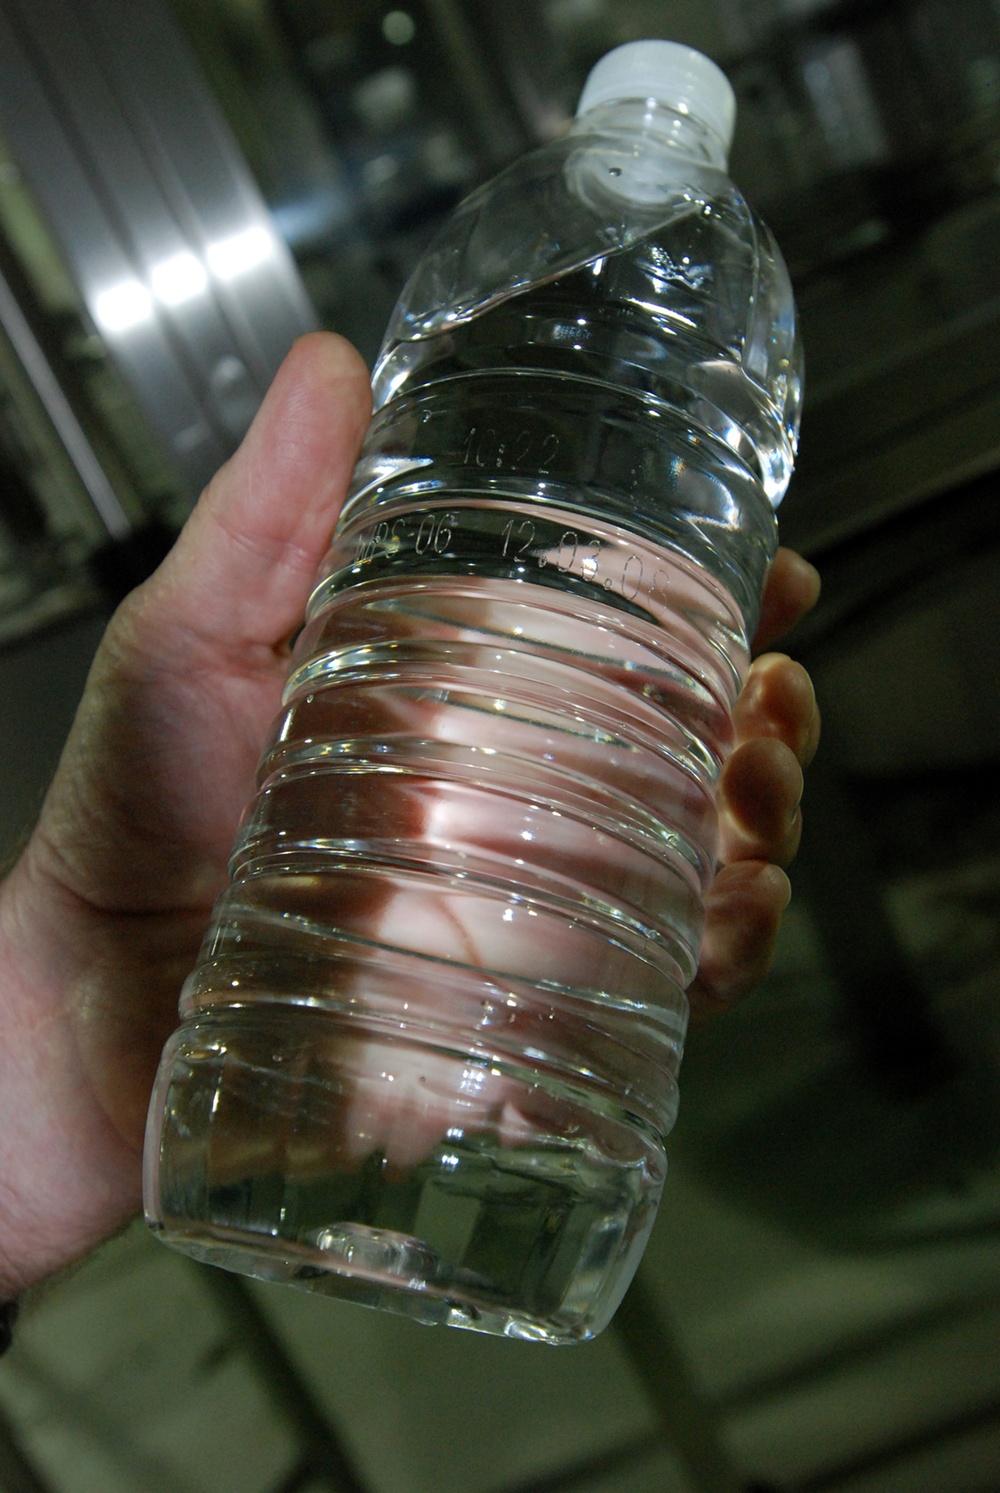 Water treatment facility provides quality hydration